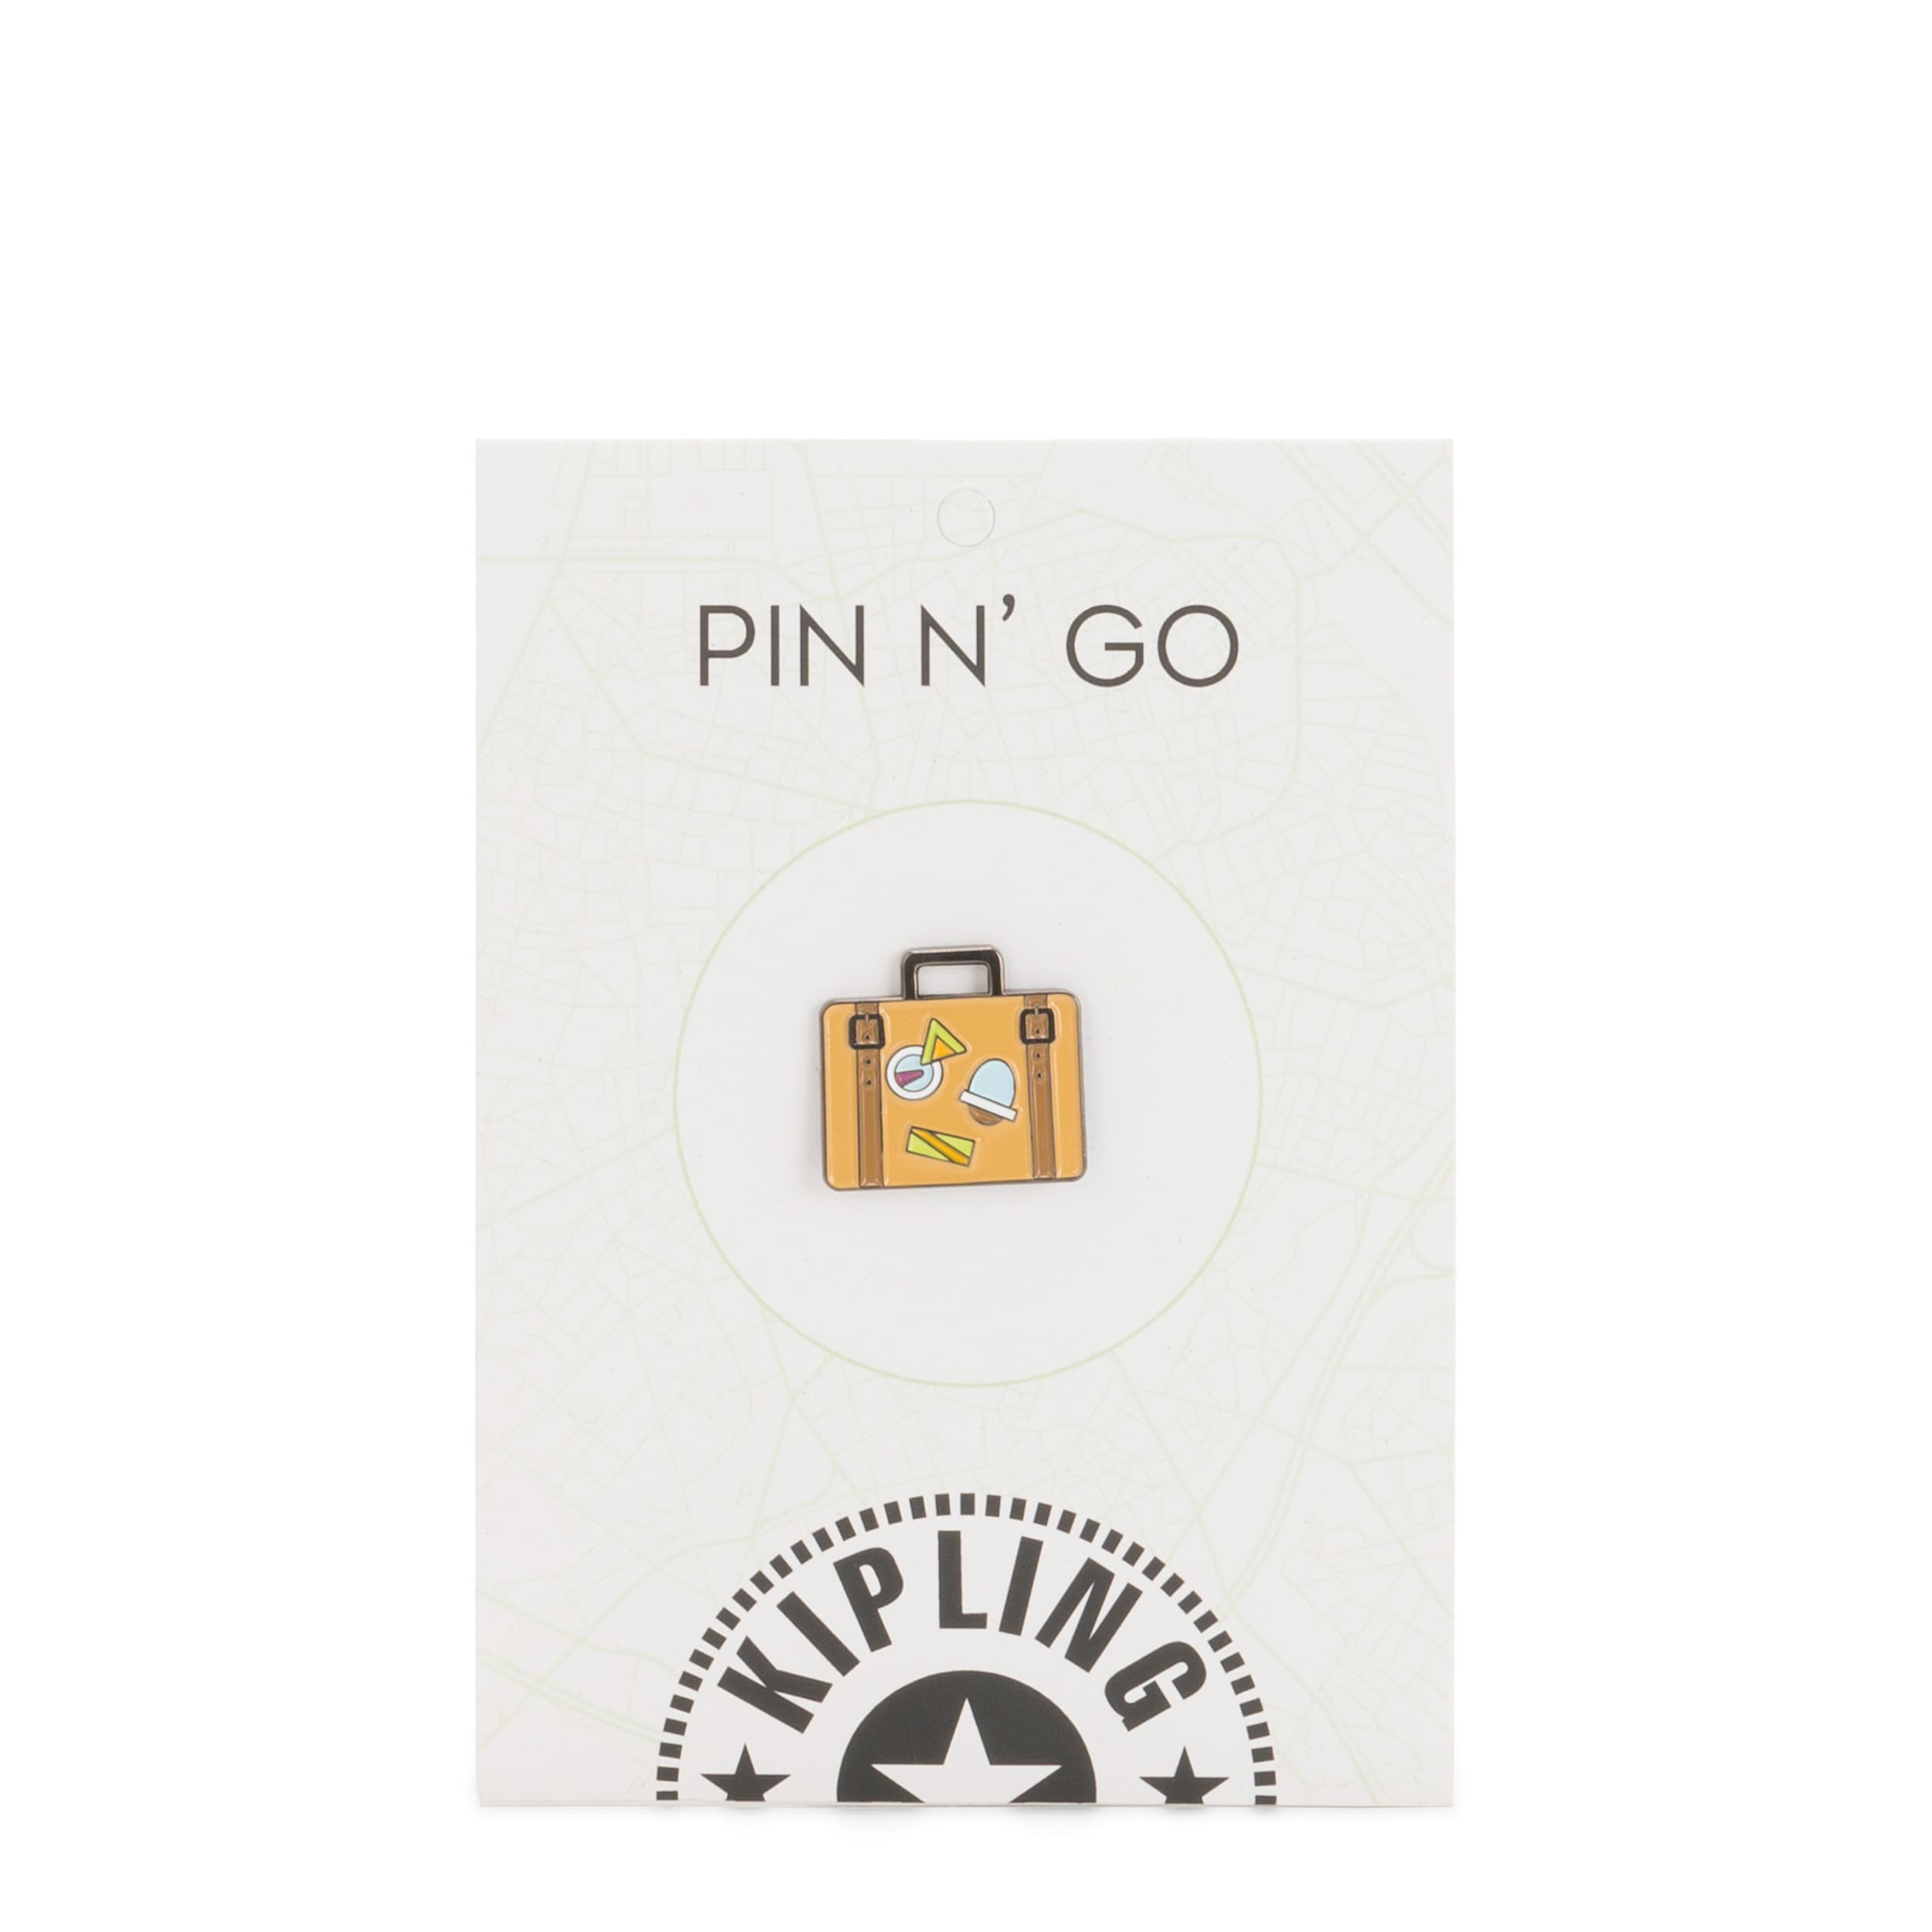 

KIPLING Accessories UNISEX Mix Col SS20 SUITCASE PIN